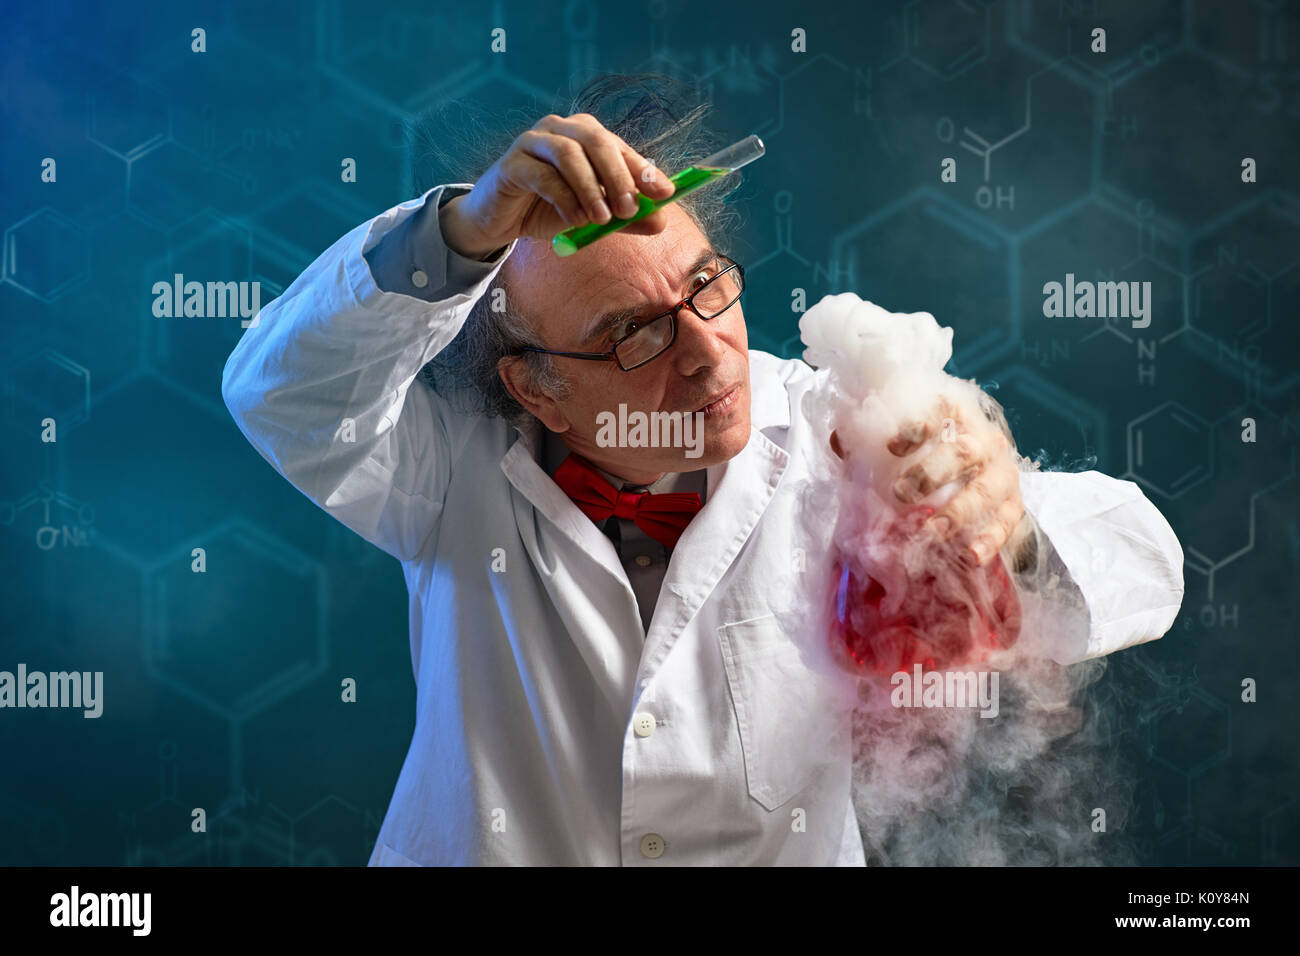 Wacky chemist carefully performed experiment with red toxic chemical and smoke Stock Photo